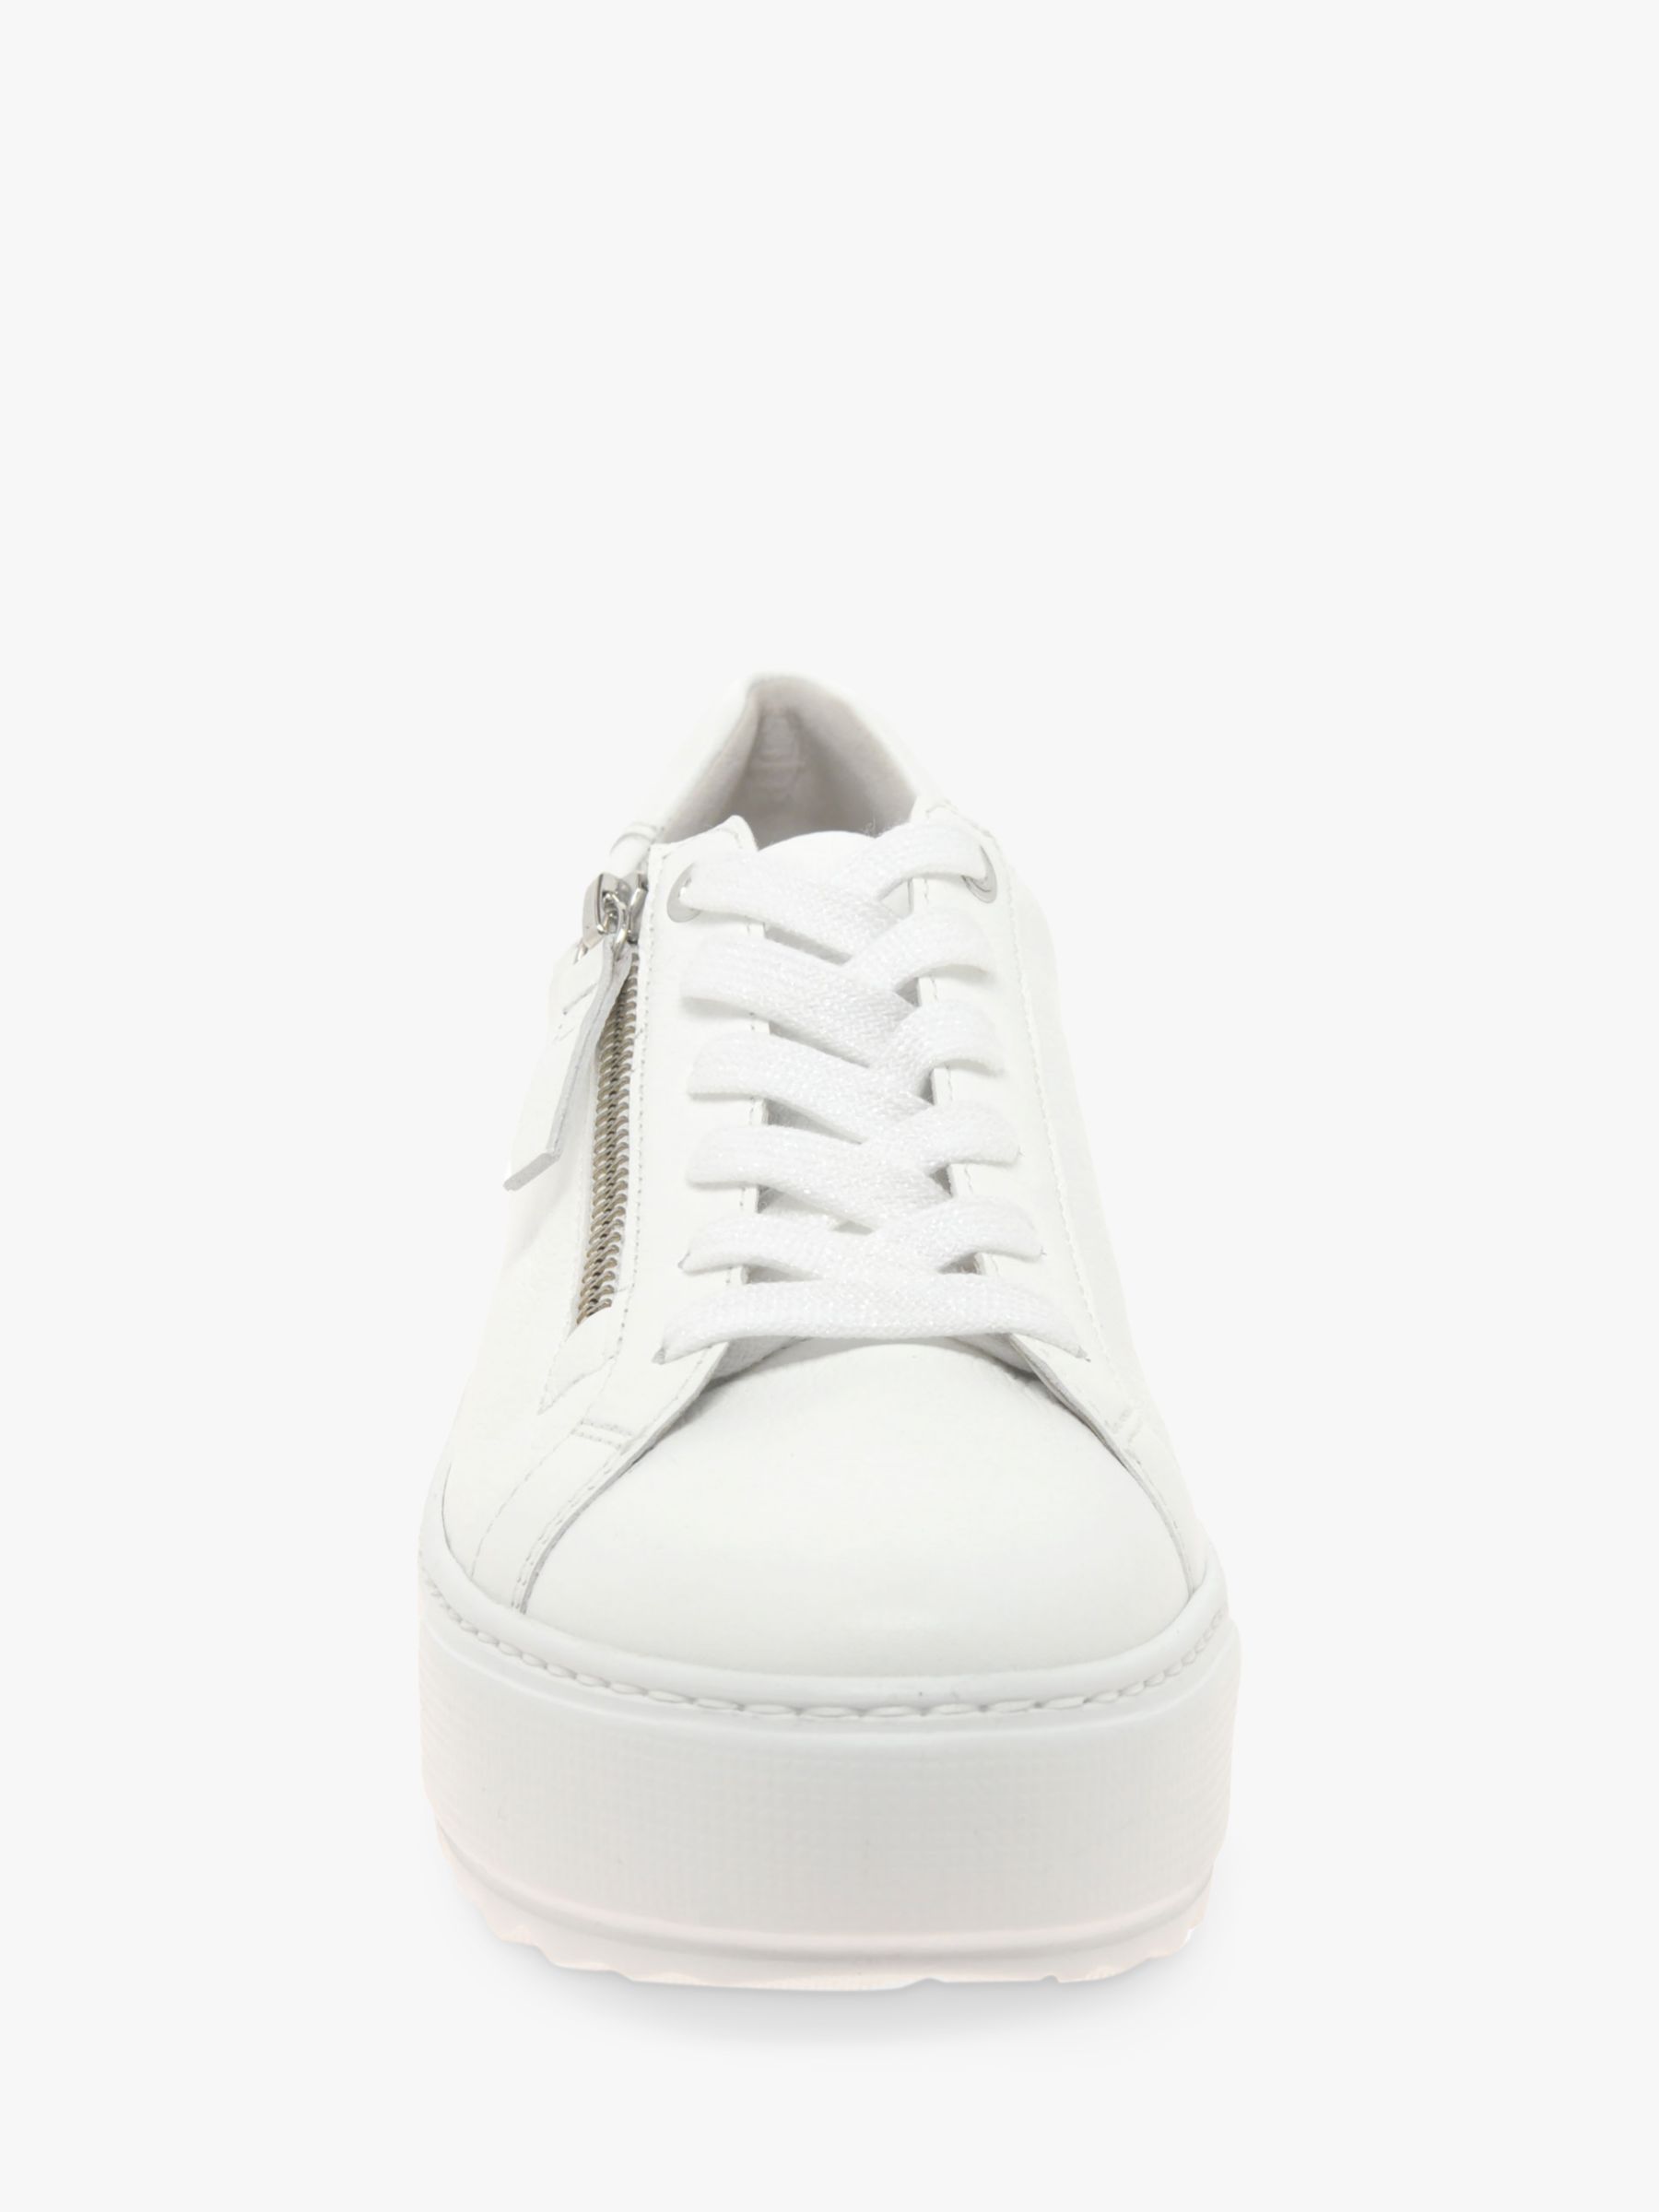 Buy Gabor Heather Wide Fit Leather Flatform Trainers, White Online at johnlewis.com